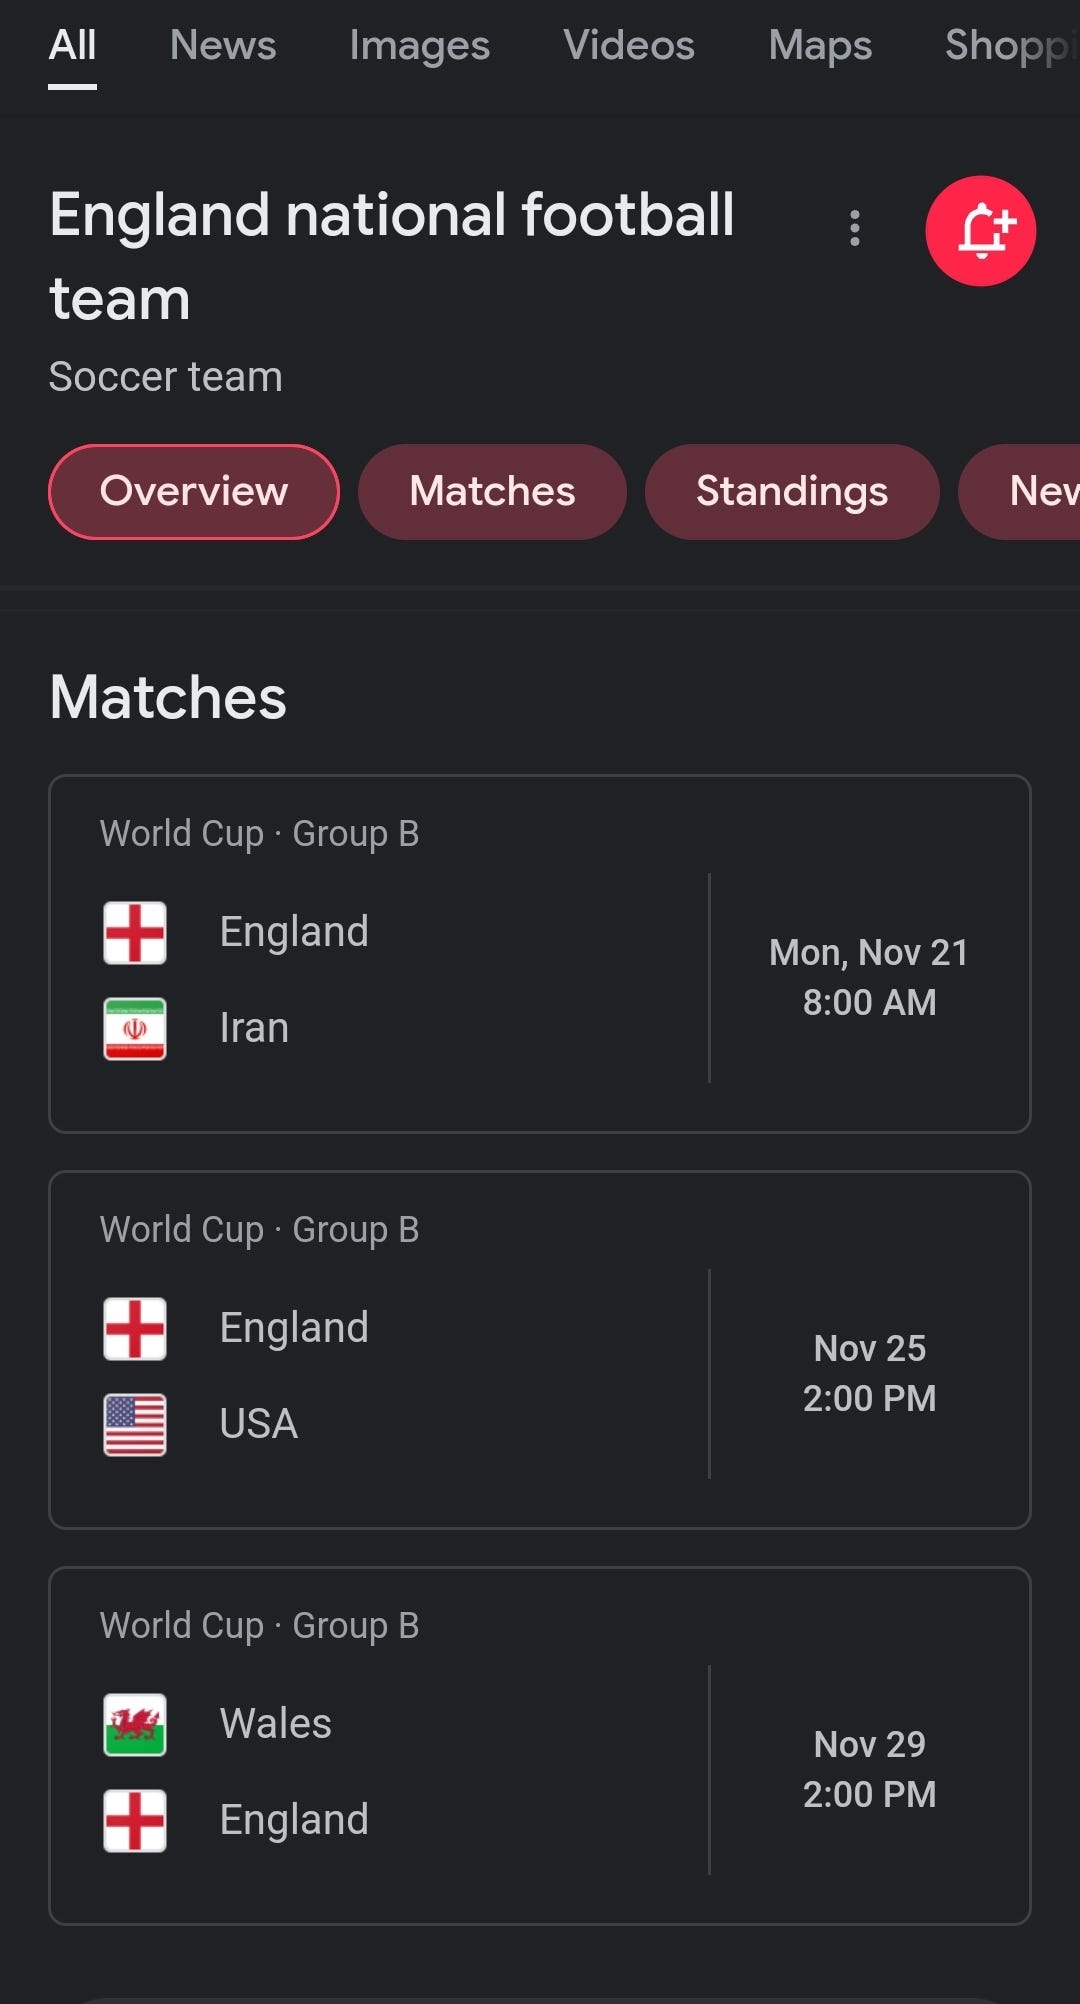 Google's search page for the English national soccer team